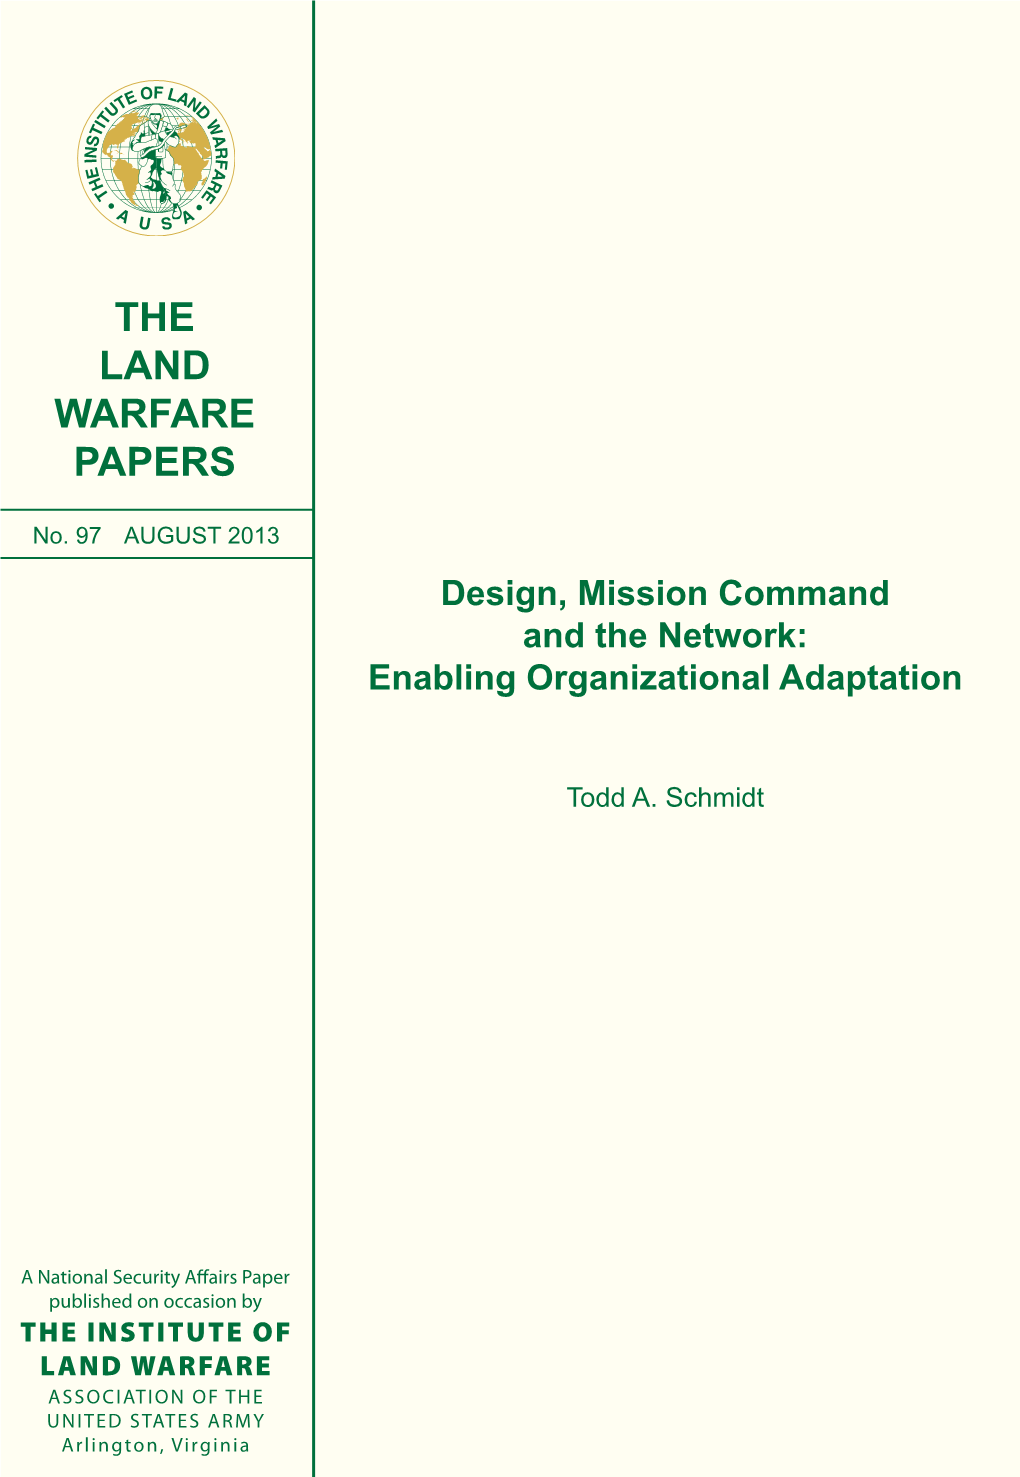 Design, Mission Command and the Network: Enabling Organizational Adaptation